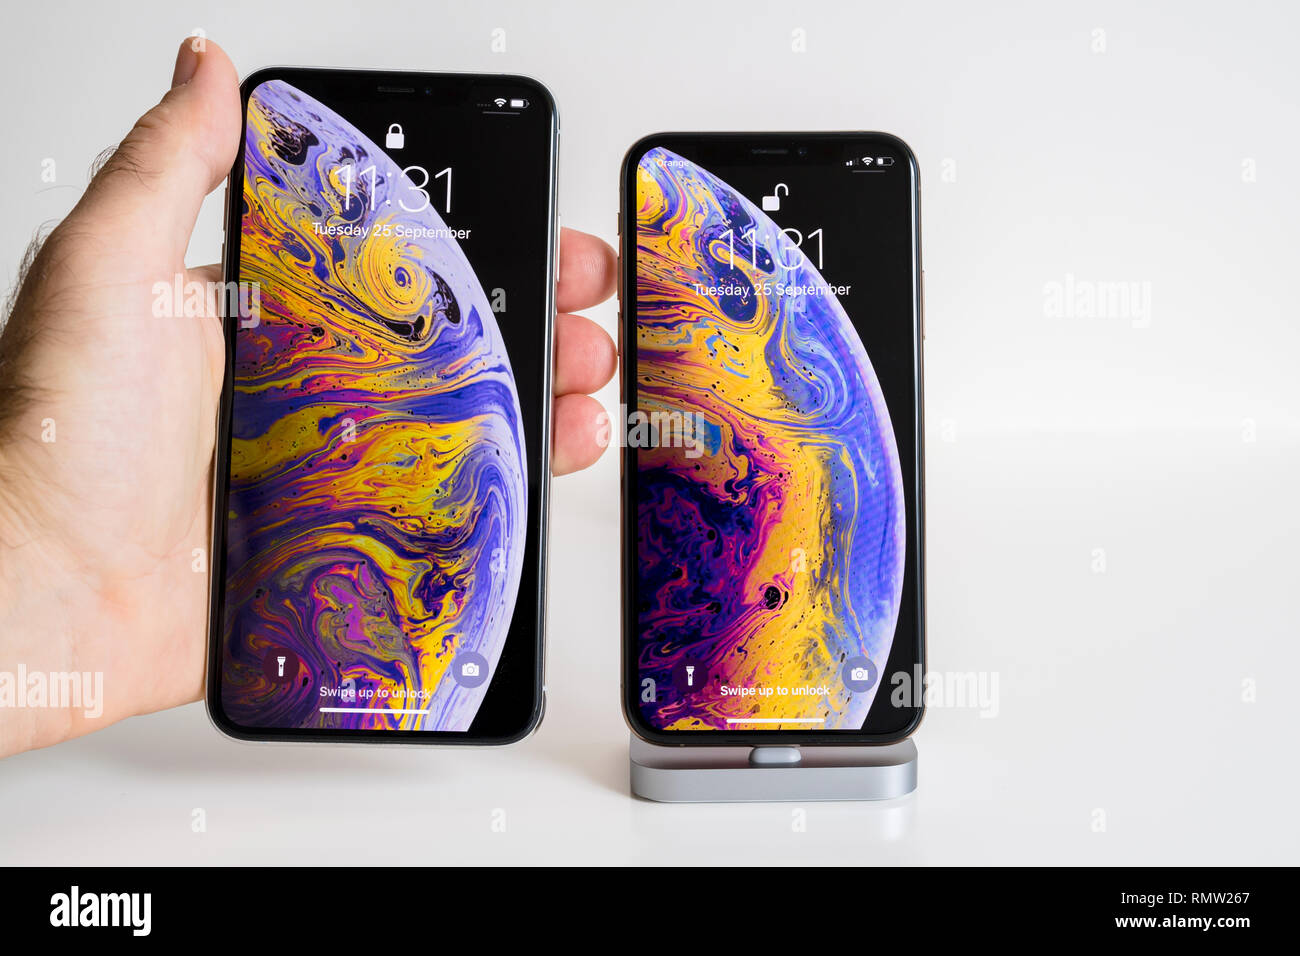 PARIS, FRANCE - SEP 25, 2018: Male hand compare new iPhone Xs and Xs Max  smartphone model by Apple Computers close up with home screen before  unlocking the device and liquid wallpaper